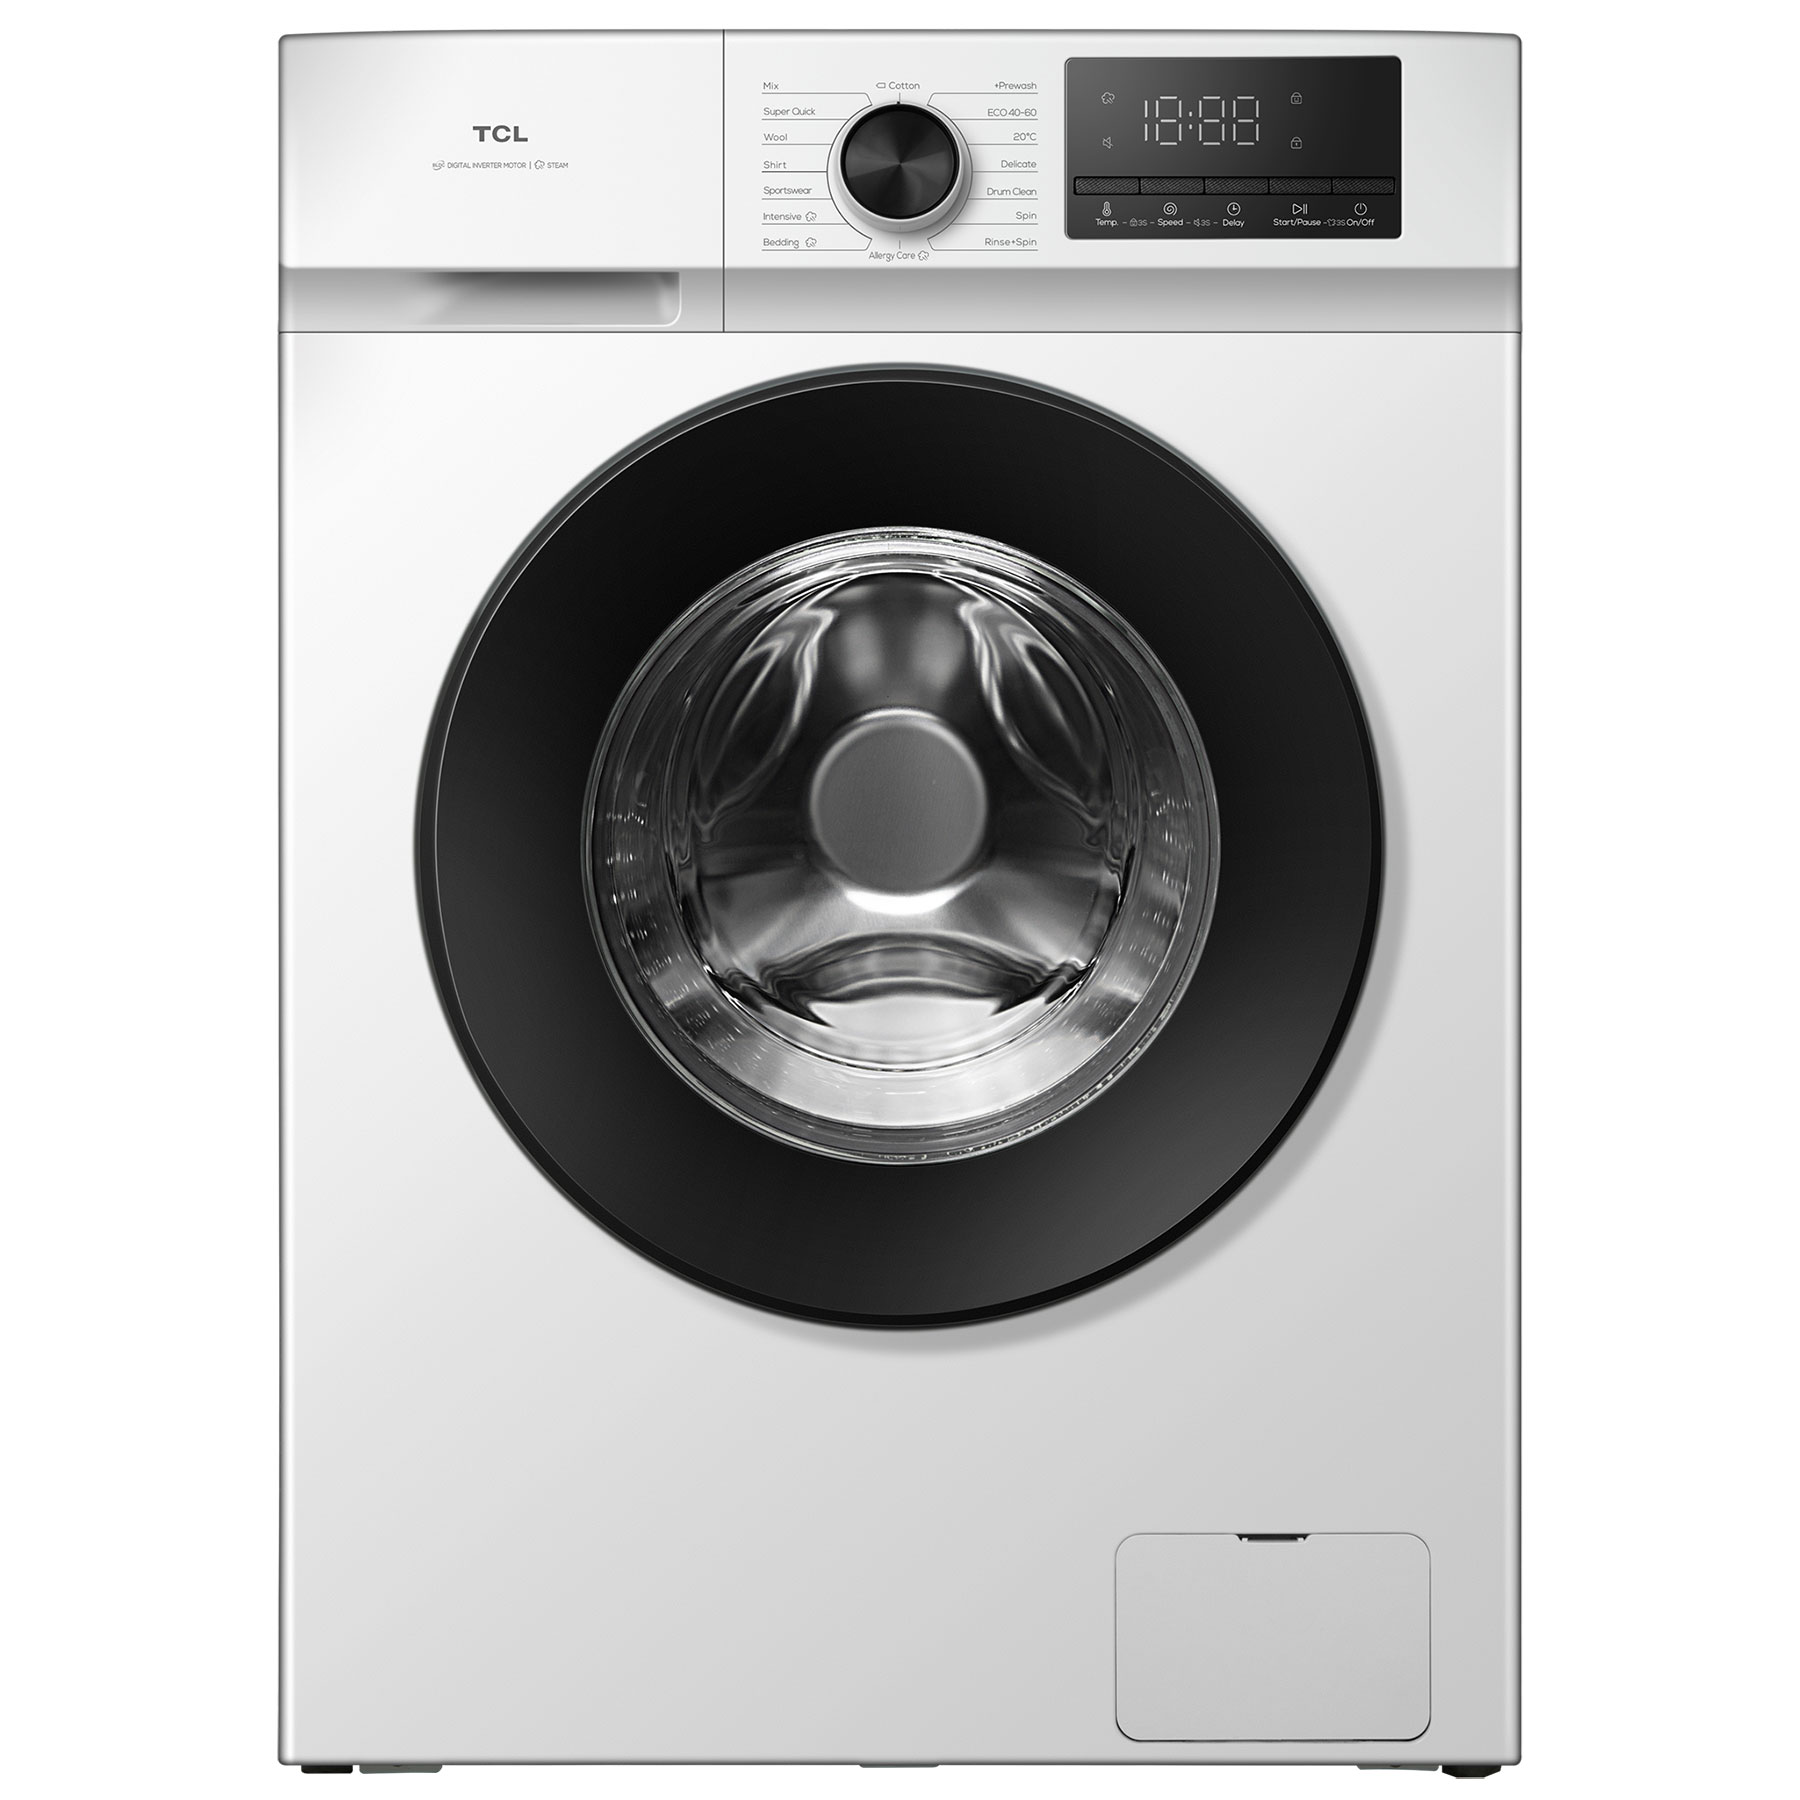 Photos - Washing Machine TCL FF0924WA0UK  in White 1400rpm 9kg A Rated 